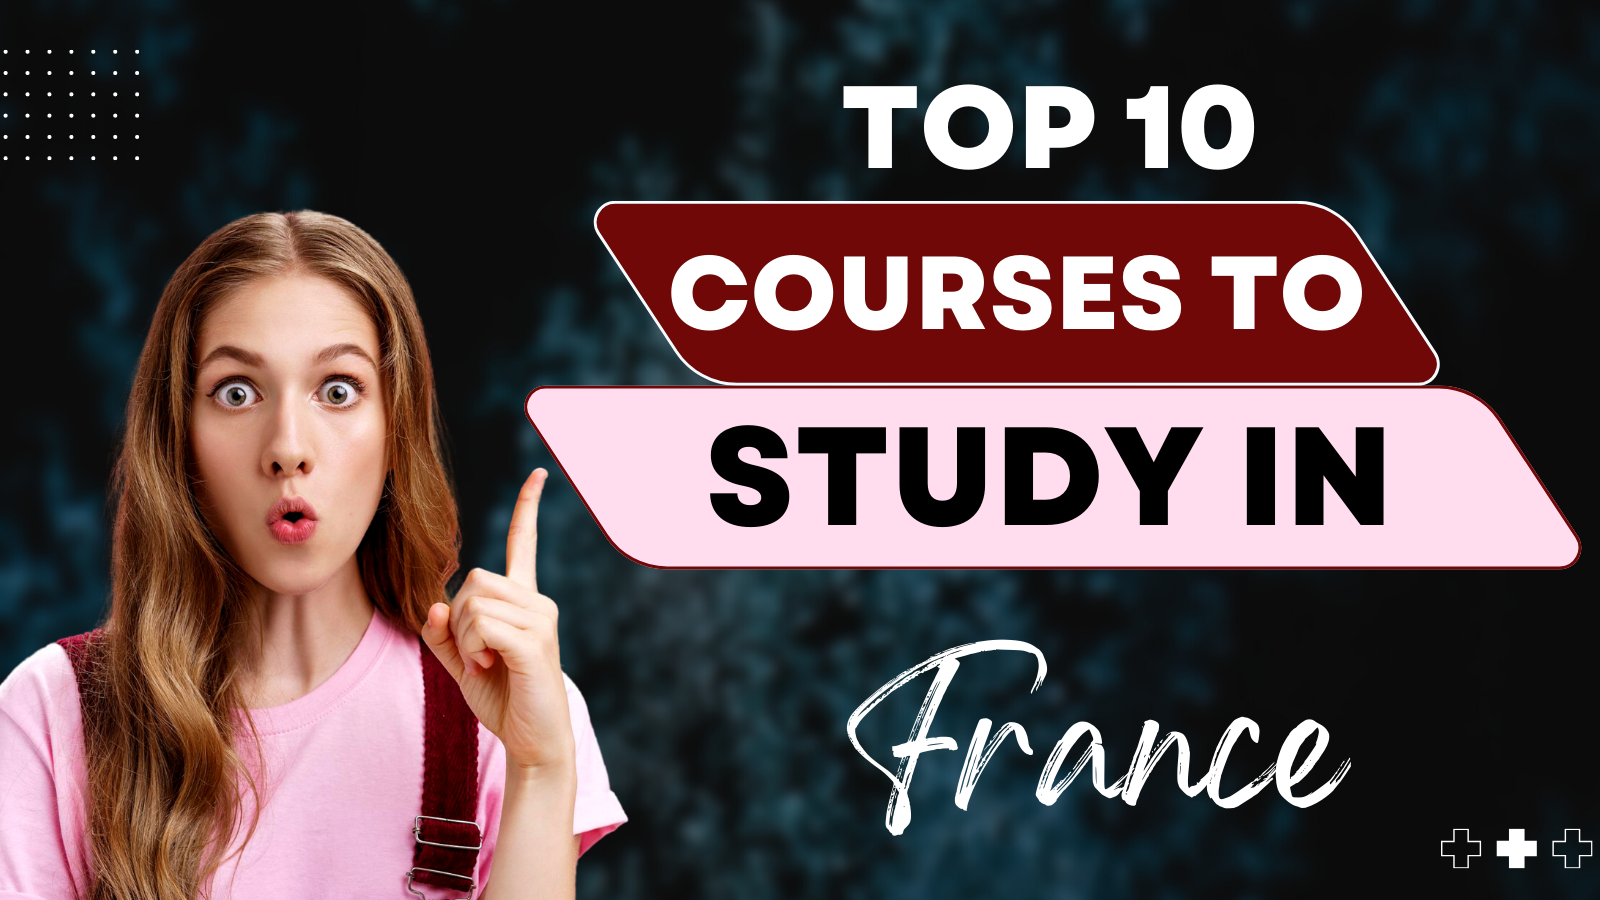 courses in france for indian students,best courses to study in europe,how to study in france for free,is it necessary to learn french to study in france,why choose france for higher studies,best courses in france,is studying in france expensive,why you choose france for study,how can i study in france for free,what level of french is required to study in france,best cities in france to study abroad,best courses in paris,best majors to study in france,where is the best country to study,nice courses to study,best cities in france to study,how much it cost to study in france,how much does it cost to study in france,best study abroad programs in france,how to study in france after 12th,is french necessary to study in france,best subjects to study in france,which country is better to study france or germany,what is the best course to study in france,
               can i study for free in france,best master courses to study in france,best courses to learn french online,